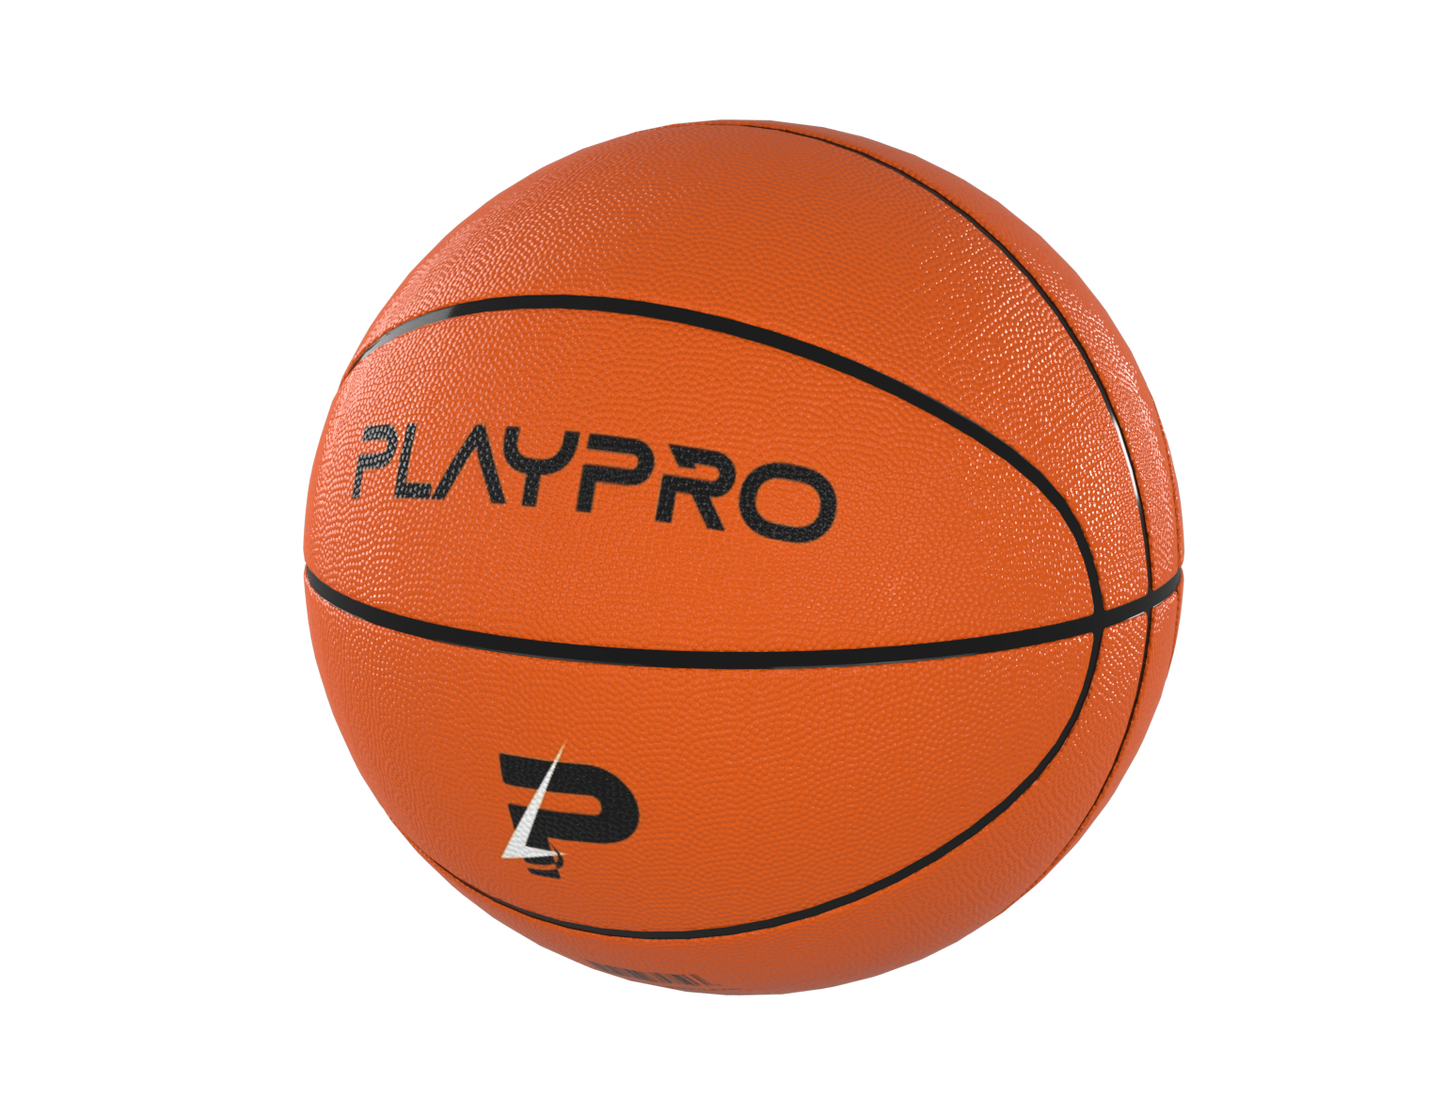 Premium Rubber Basketball for Kids and Adults – Max Grip, Perfect Bounce and Rebound with Extended Air Retention - Orange